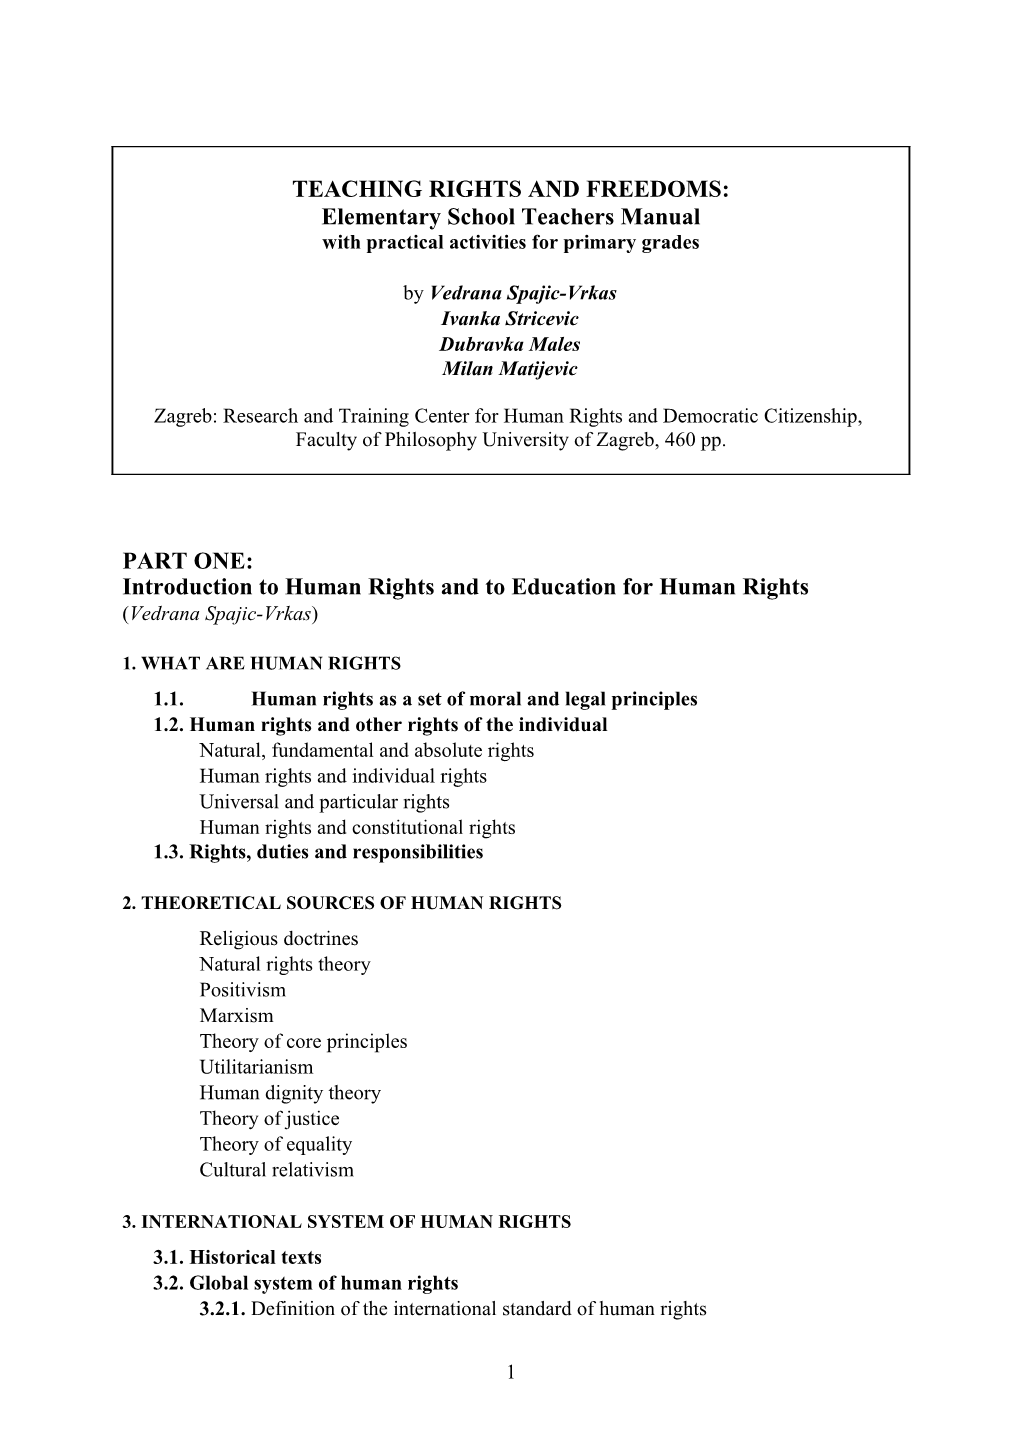 Teaching Rights and Freedoms